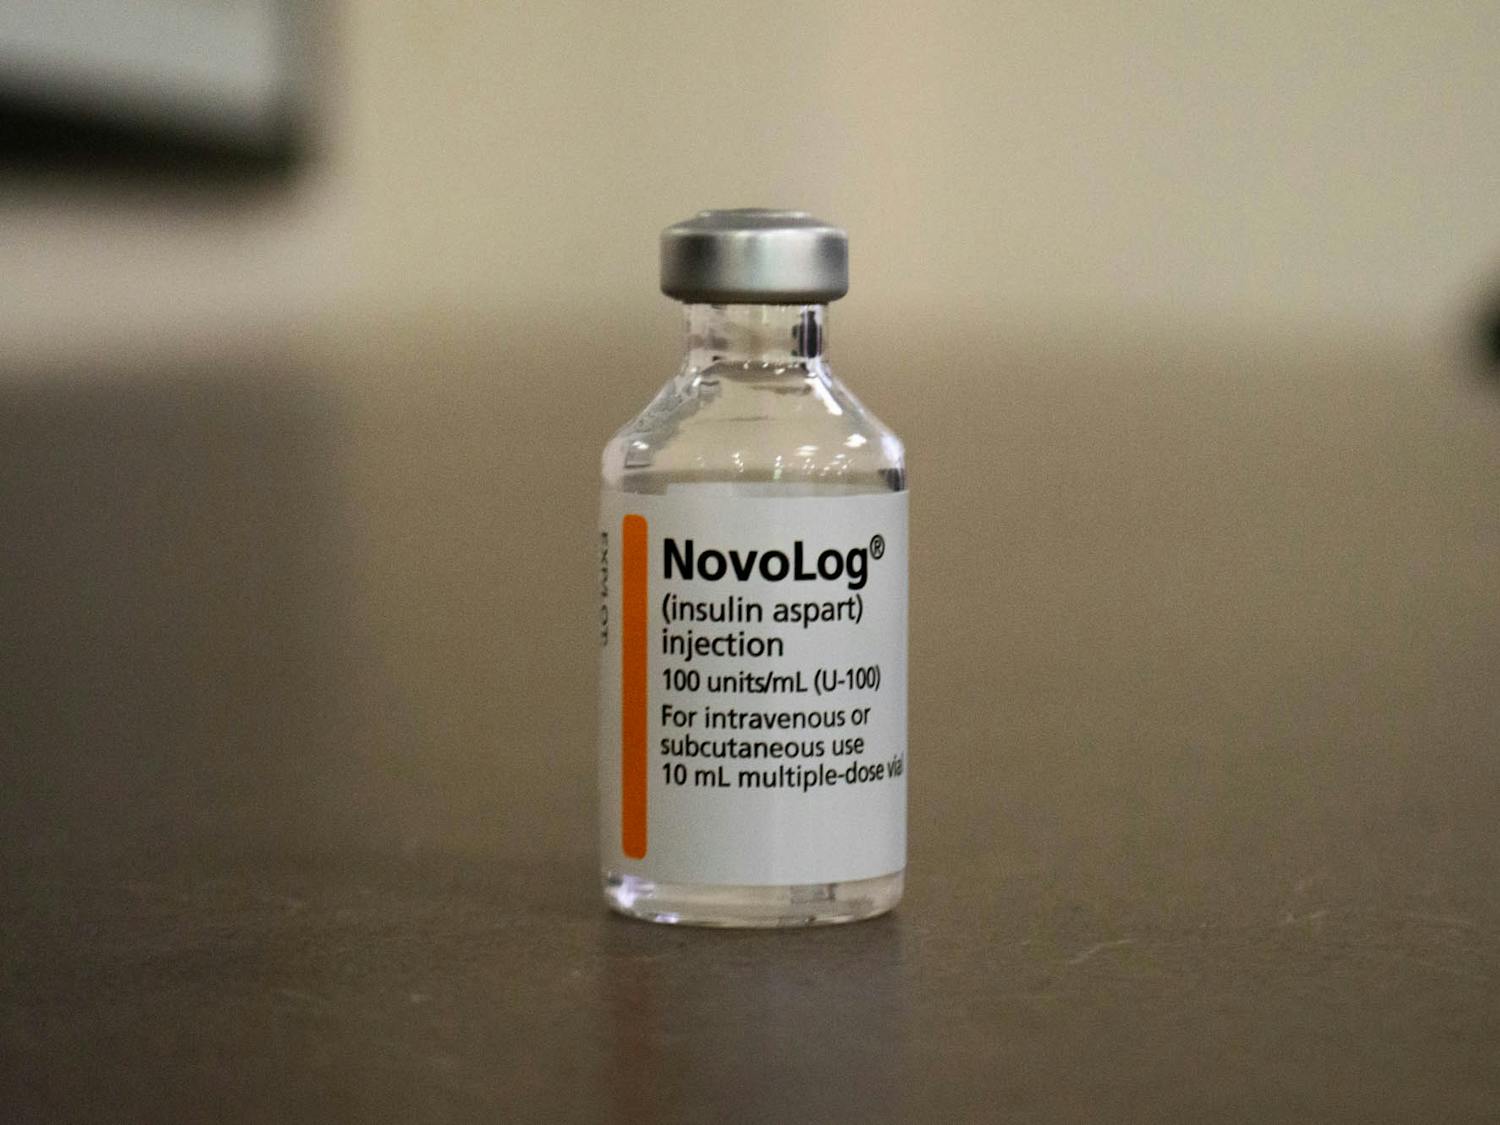 DTH Photo Illustration. A vile of NovoLog, a brand name insulin aspart, is used to treat type 1 and type 2 diabetes.